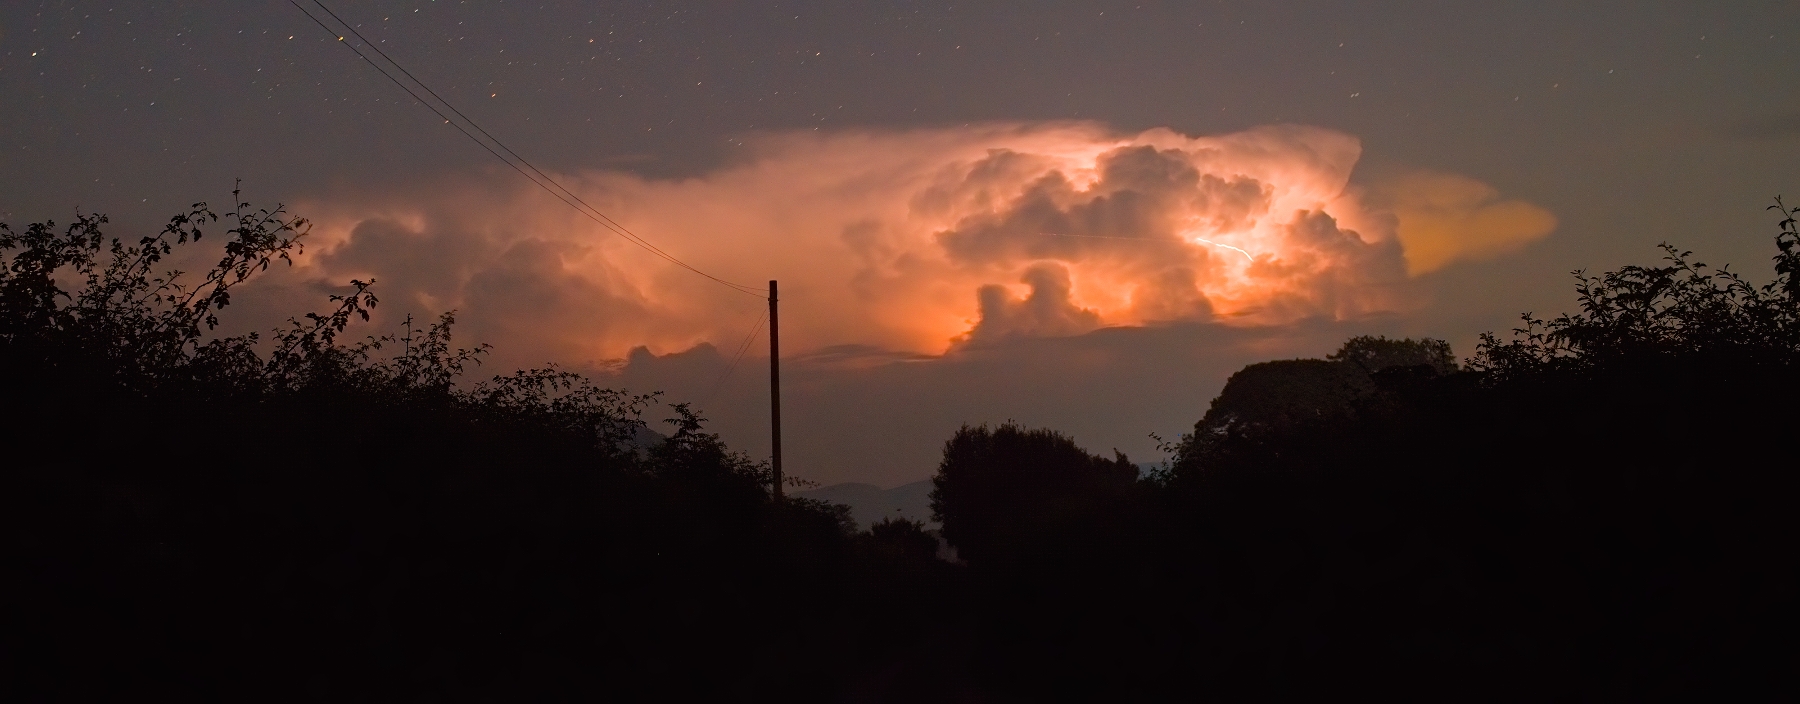 Another Tuesday Lightning Show over Dolau in mid Wales